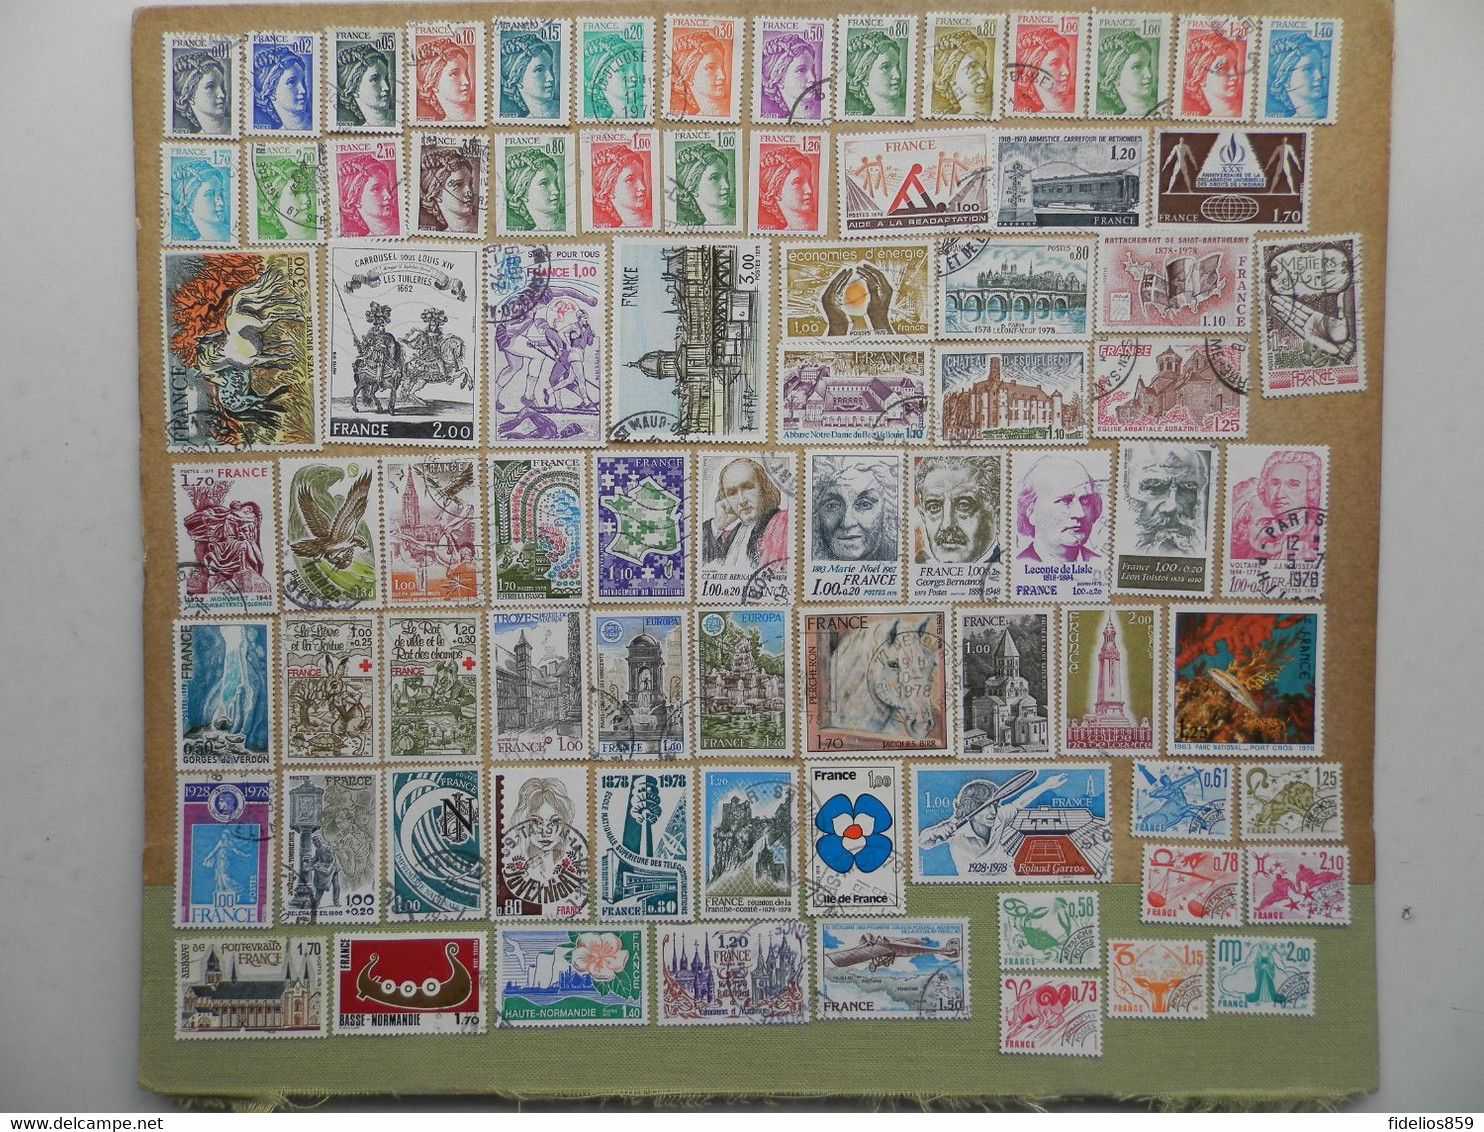 FRANCE ANNEE COMPLETE 1978 OBLITEREE SOIT 69 TIMBRES POSTE + PA 51 + PREOS 150/157 1ER CHOIX - 1970-1979